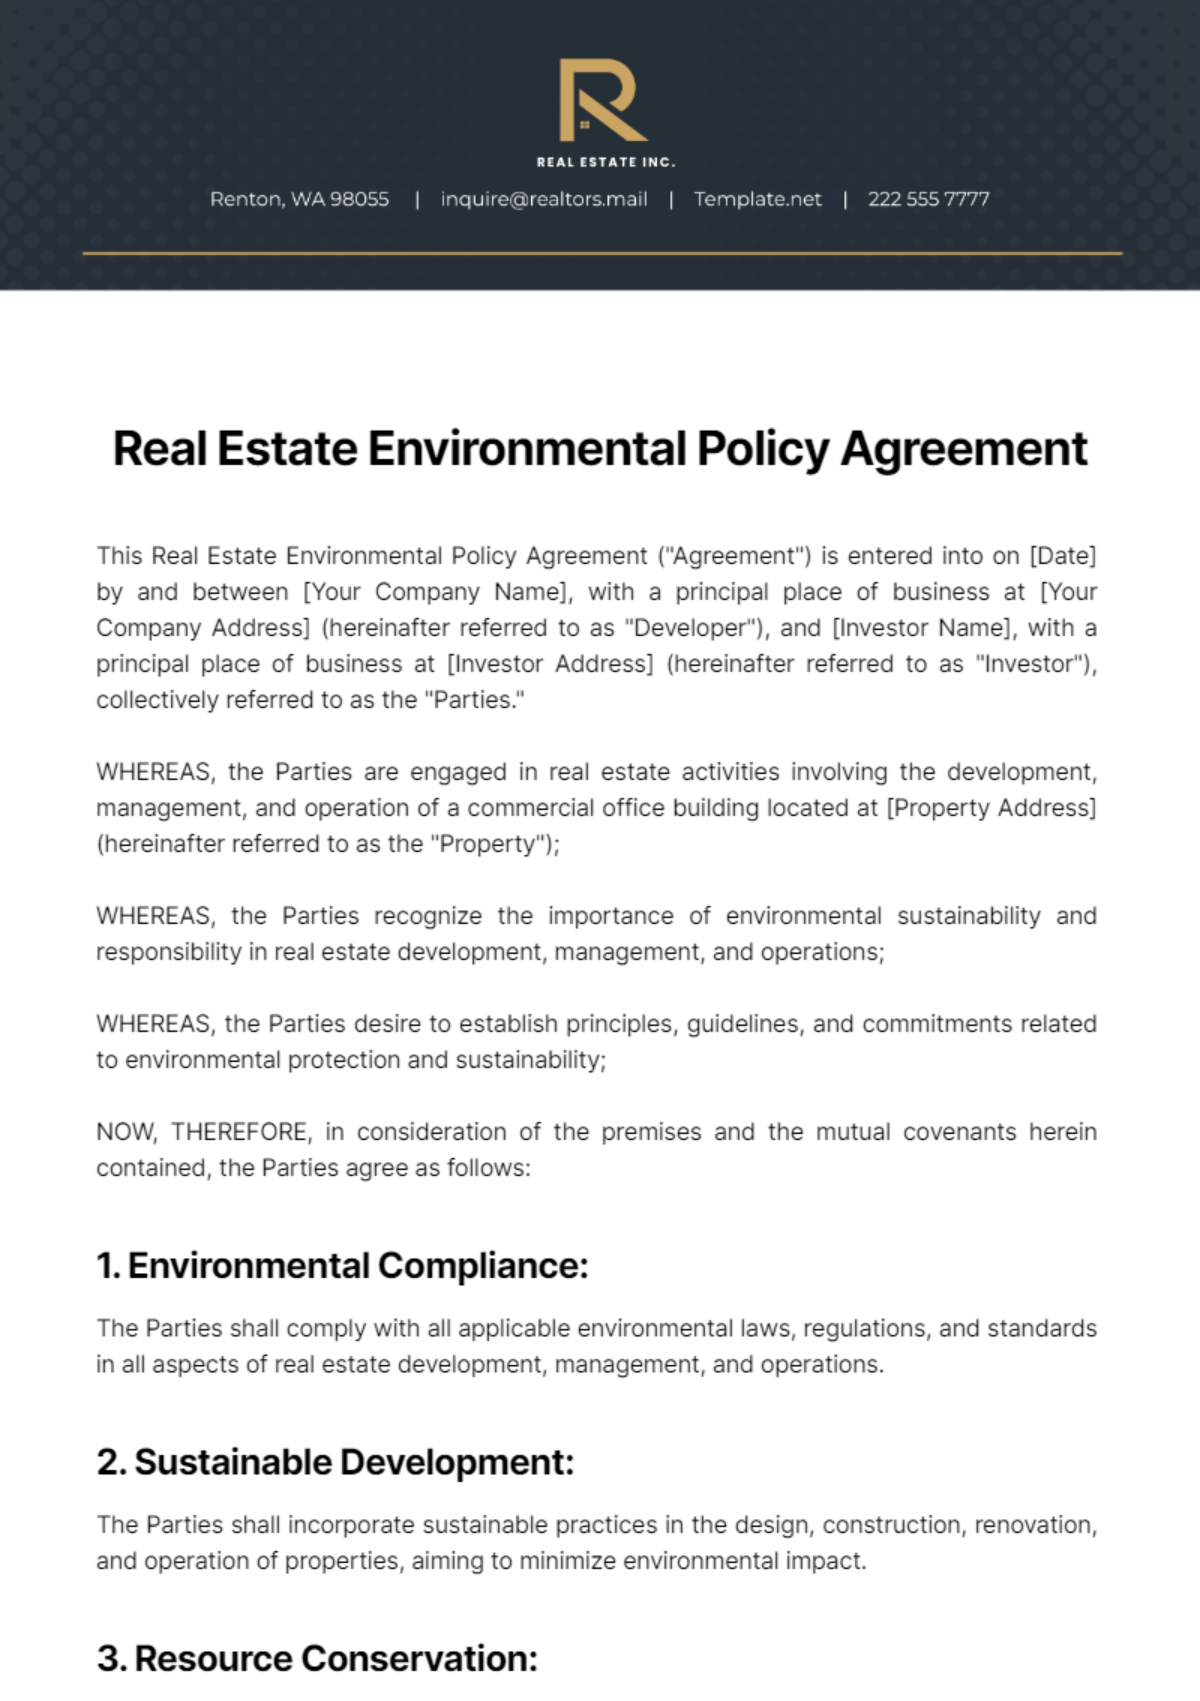 Real Estate Environmental Policy Agreement Template